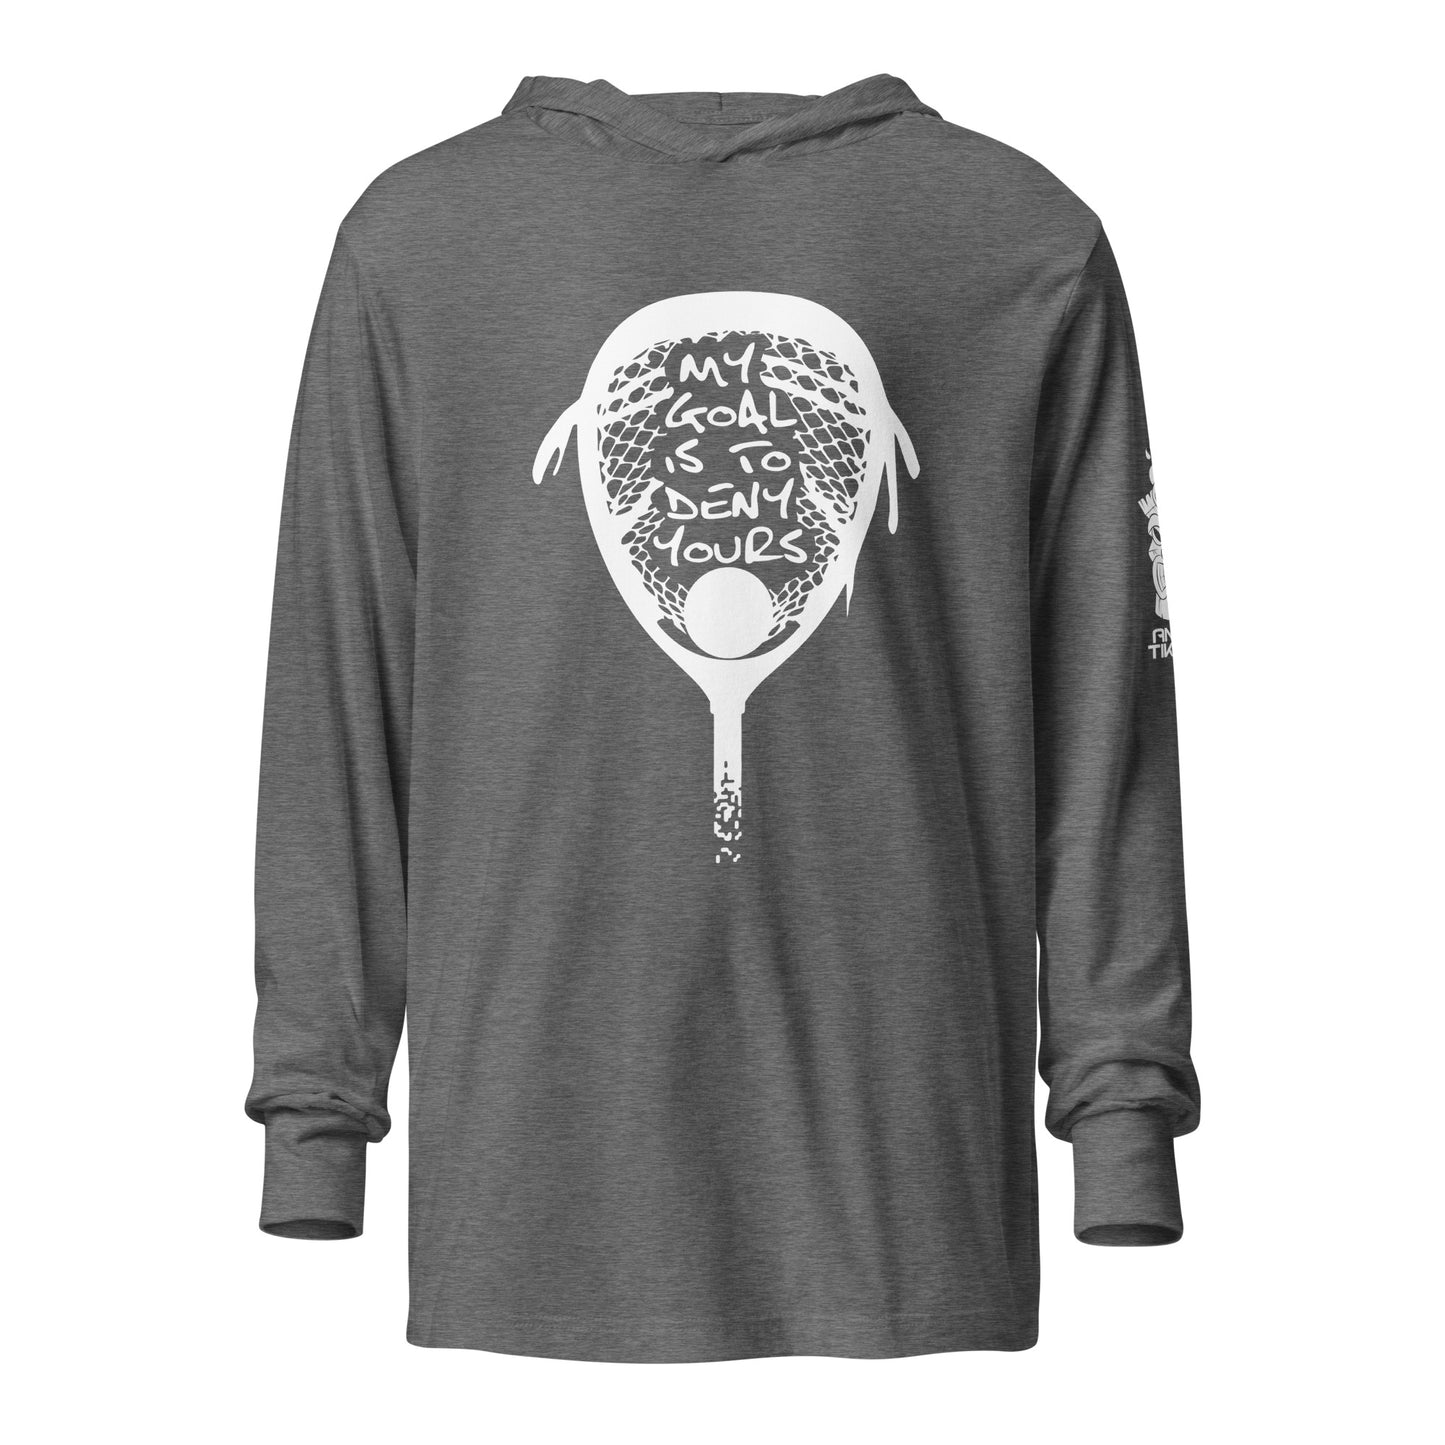 My goal is to deny yours lacrosse Hooded long-sleeve tee